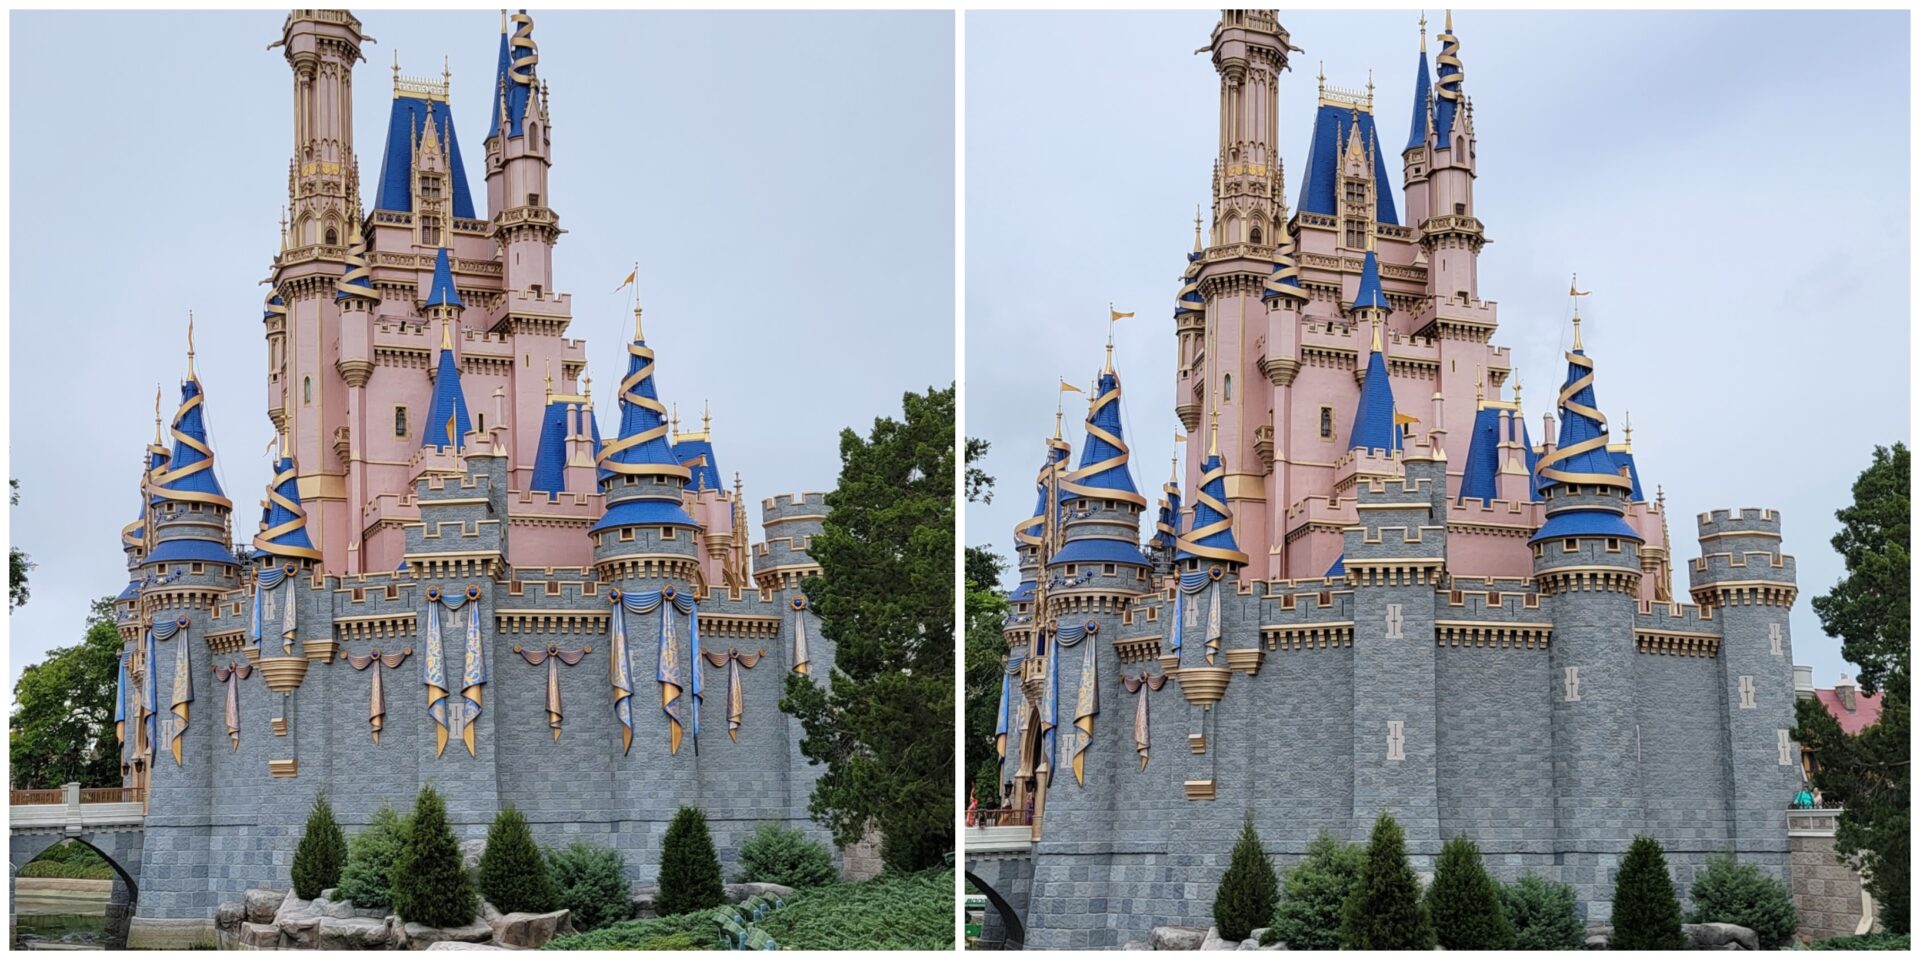 More Disney World 50th Anniversary Decorations Removed from Cinderella Castle